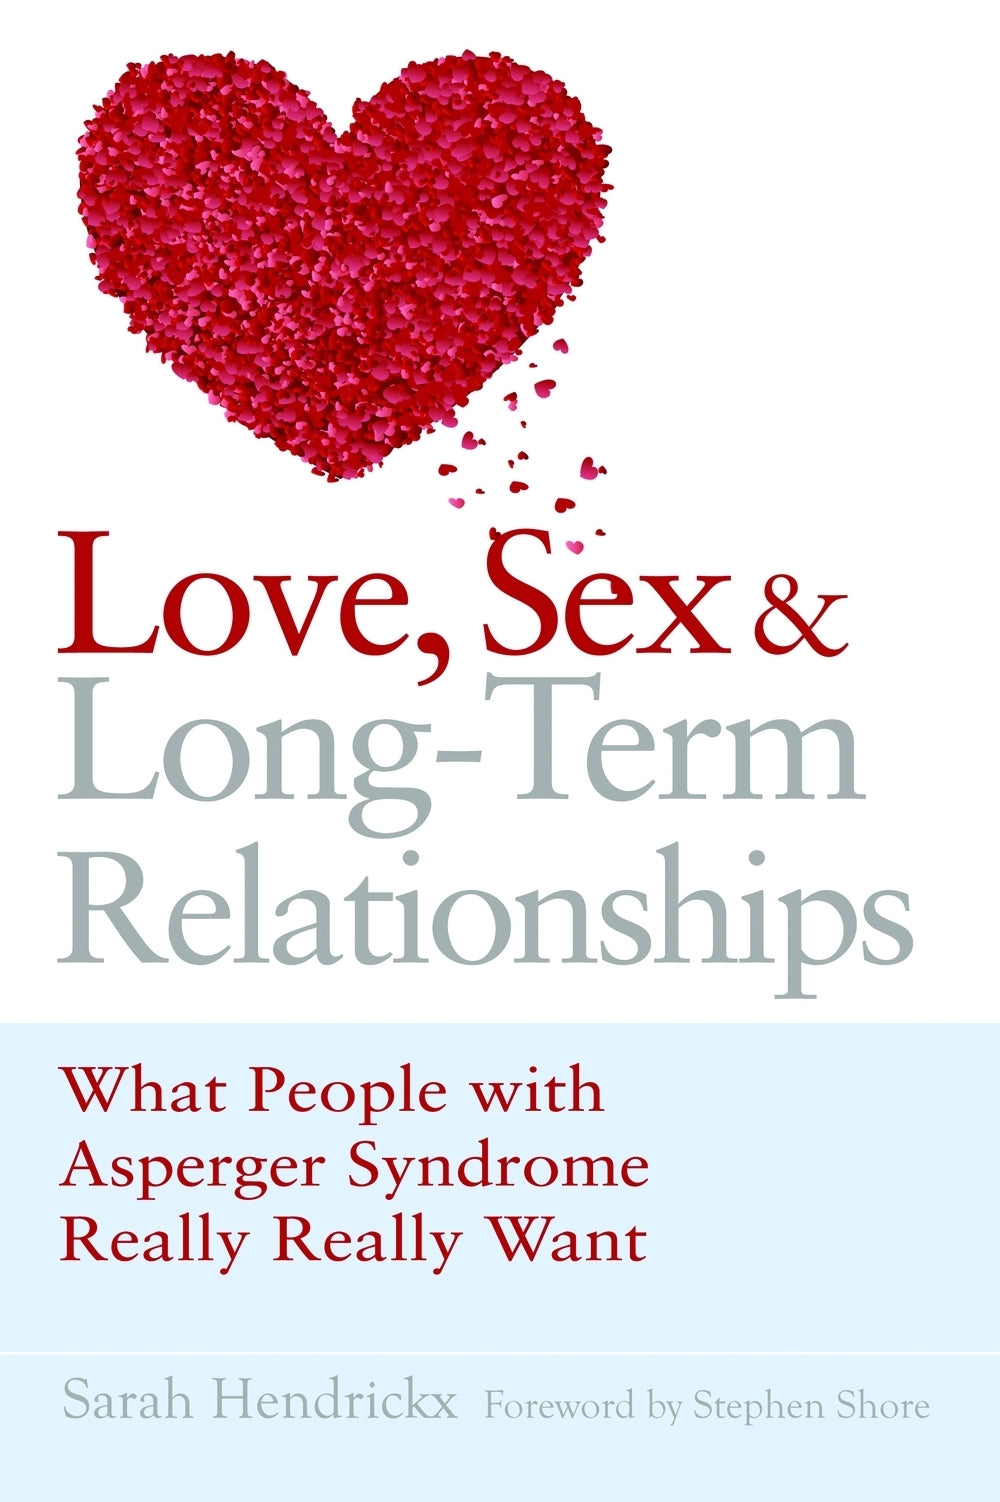 Love, Sex and Long-Term Relationships by Sarah Hendrickx, Stephen Shore